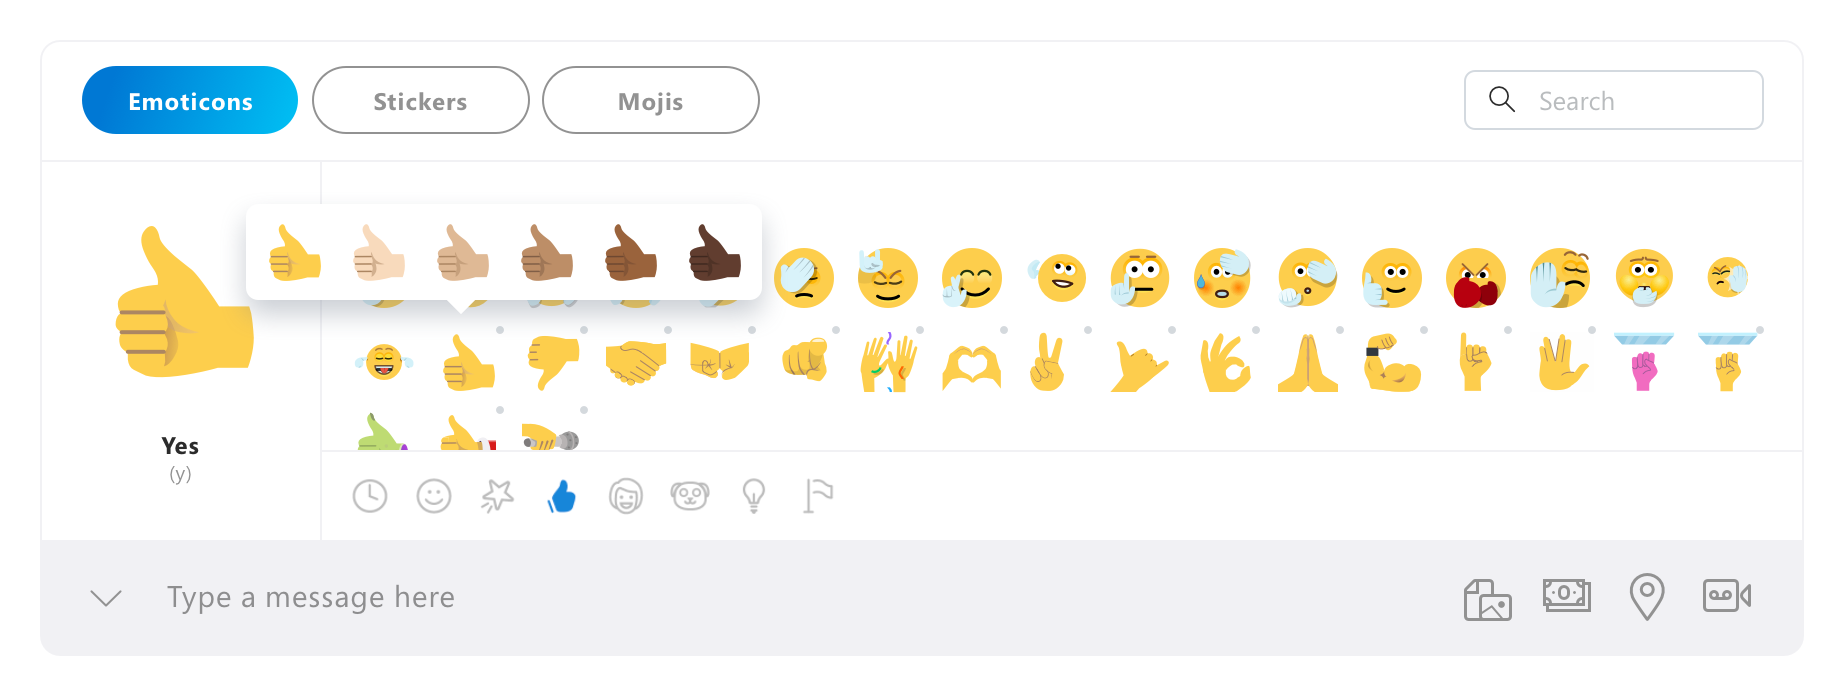 Personalized Emoticons now here in Skype Insider Preview 8.38.76.134 cbf3054e-8aea-4db1-aa31-27b9d0edd45e?upload=true.png